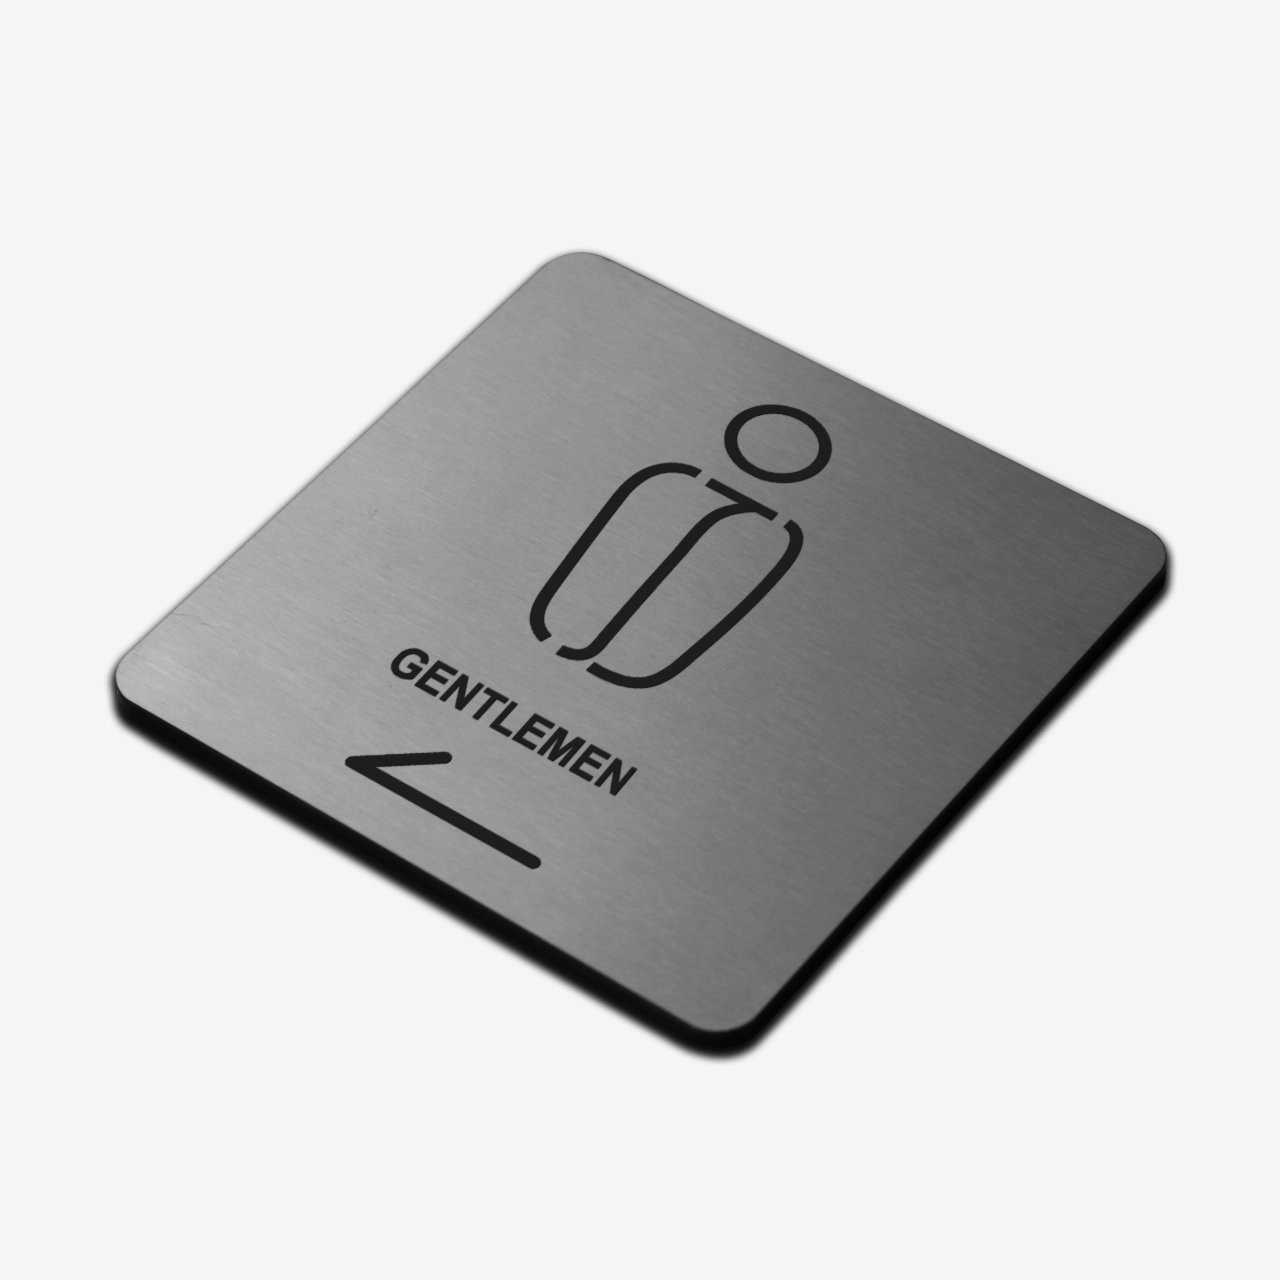  Gentleman WC - Stainless Steel Sign Bathroom Signs square Bsign